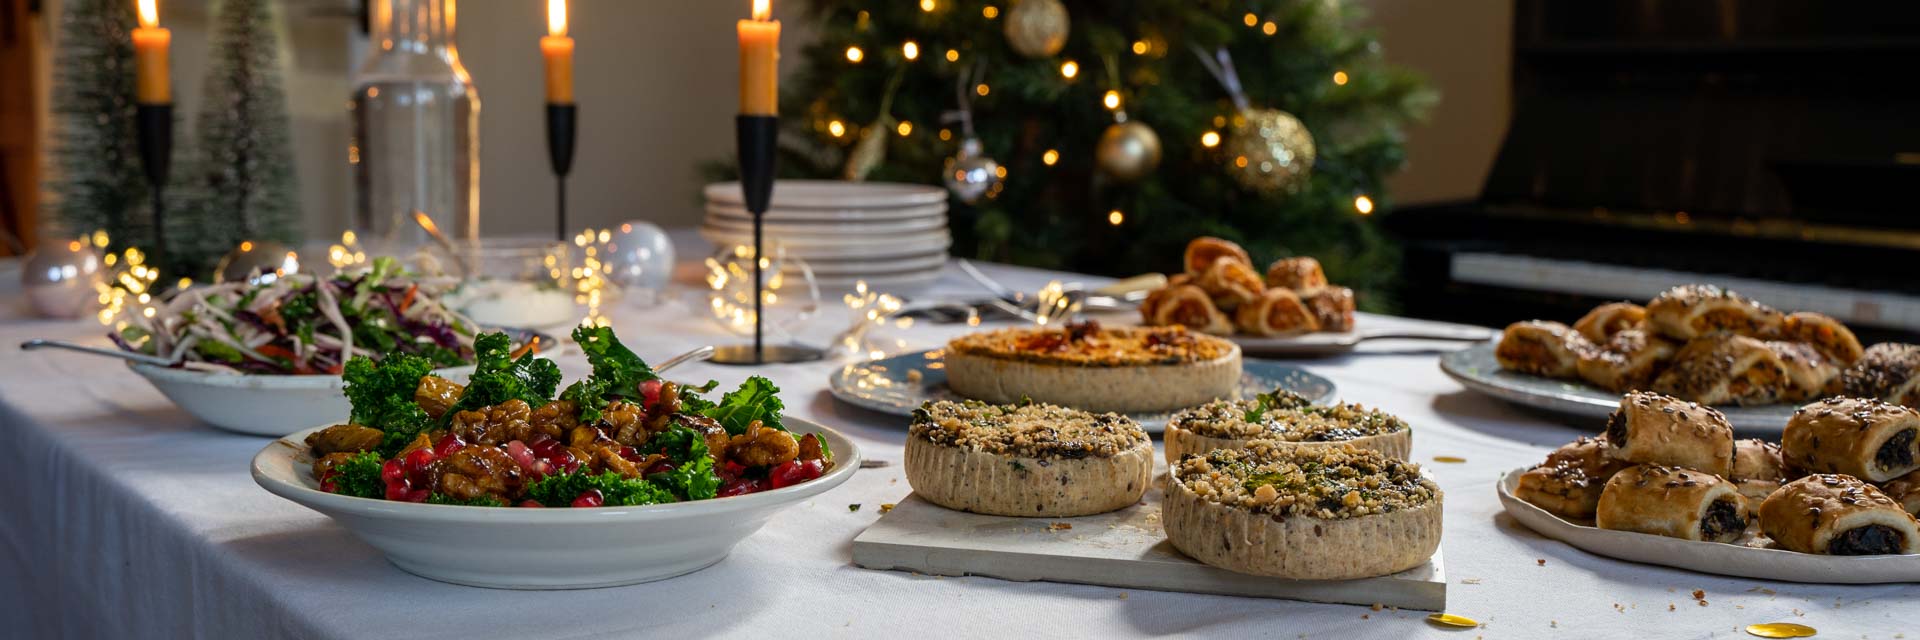 Hamper competition image - Christmas buffet